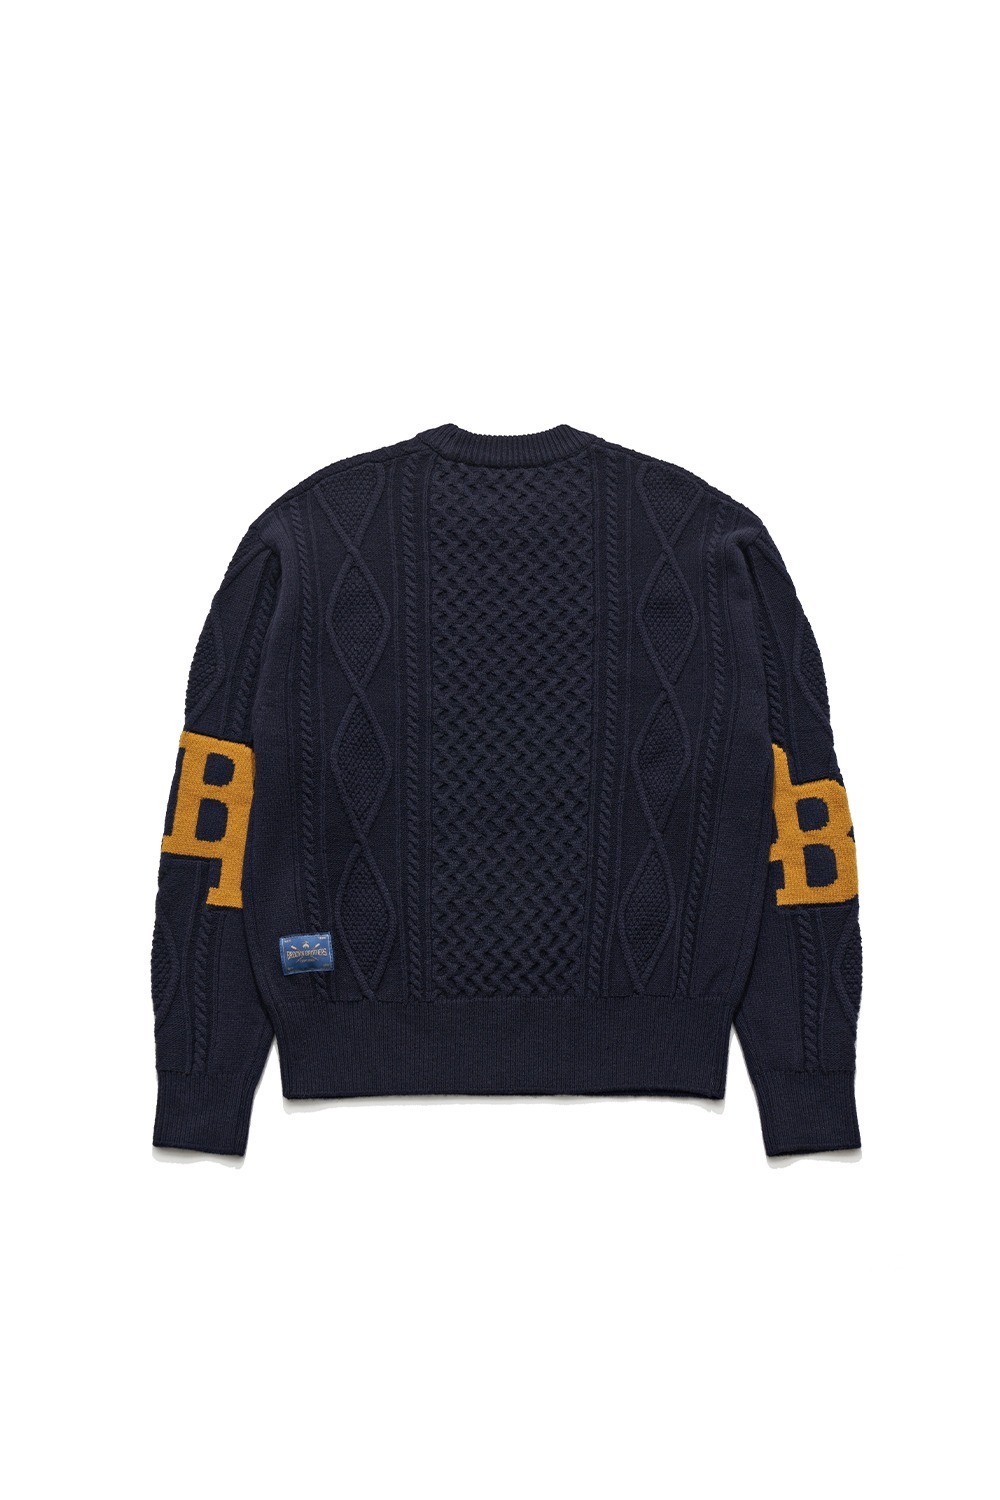 [EASTLOGUE X BROOKS BROTHERS] B.B CABLE KNIT SWEATER / D.NAVY